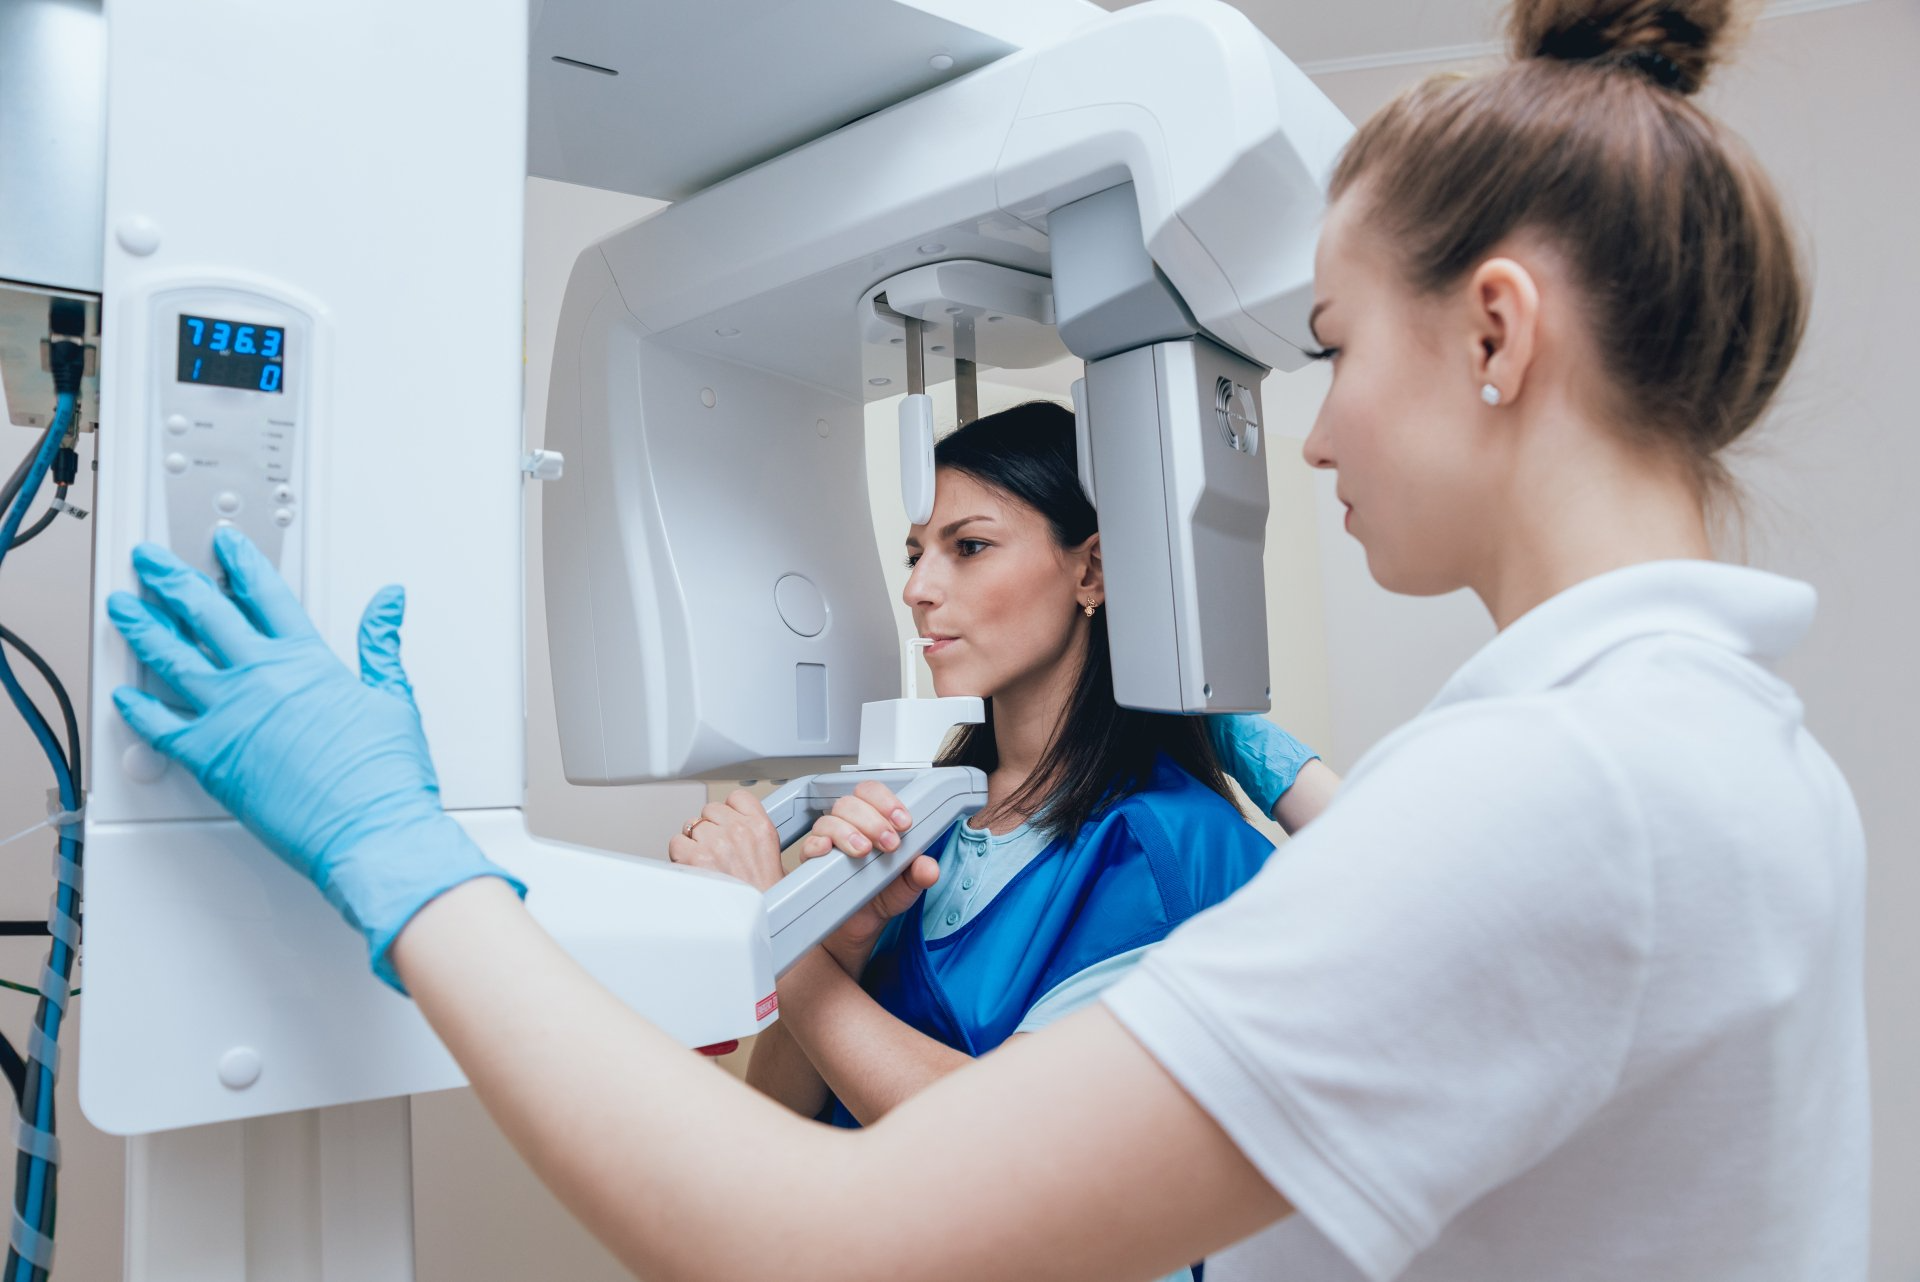 Dental technology | x ray machine | dentist near you | female patient getting an x ray | Bloor Street Dental | Best Family and Cosmetic Dentist In Mississauga For Implants, Braces, and Invisalign